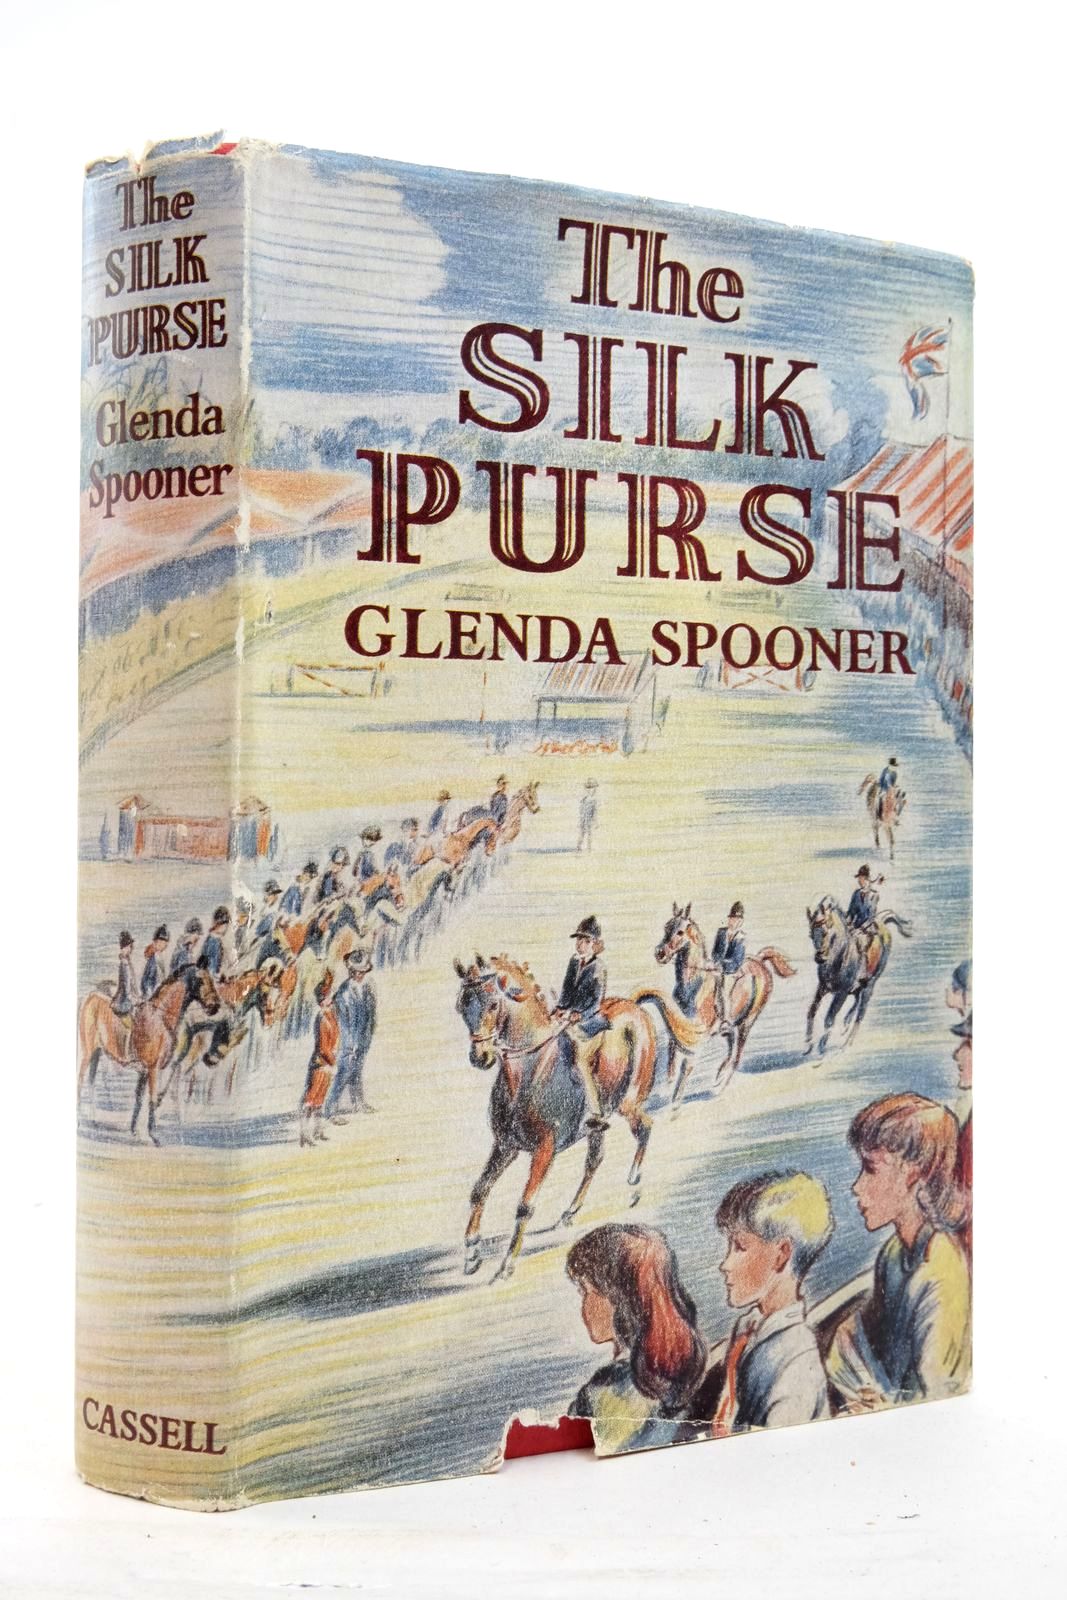 Photo of THE SILK PURSE written by Spooner, Glenda illustrated by Bullen, Anne published by Cassell & Company Ltd (STOCK CODE: 2137174)  for sale by Stella & Rose's Books